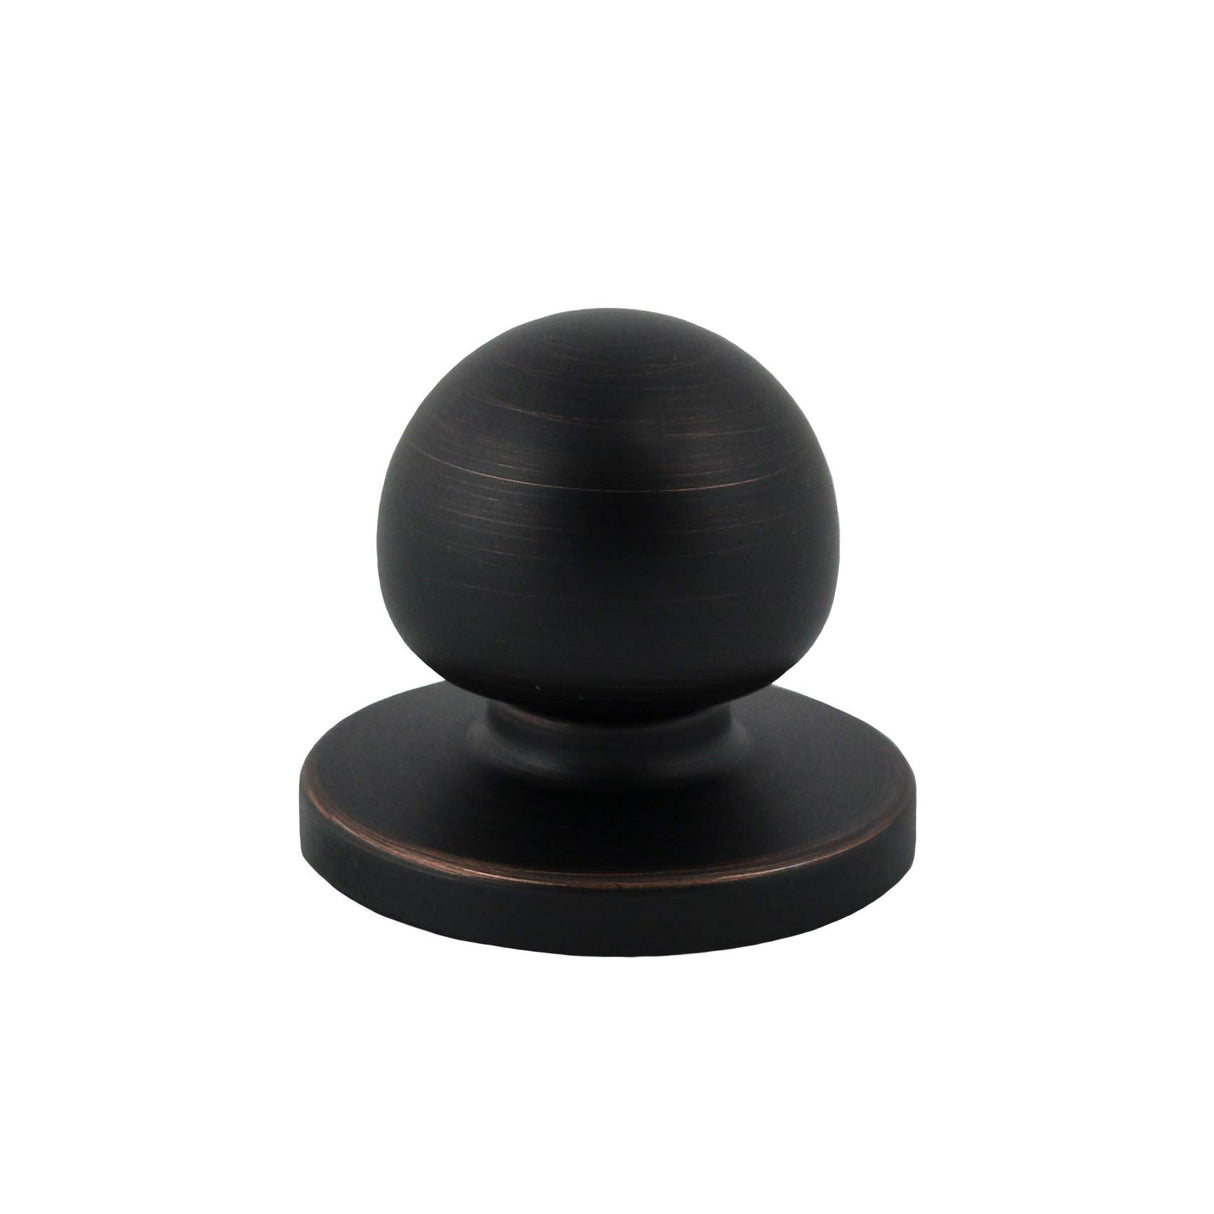 2 Pack of Oil Rubbed Bronze Bi-fold Knobs with Backplates